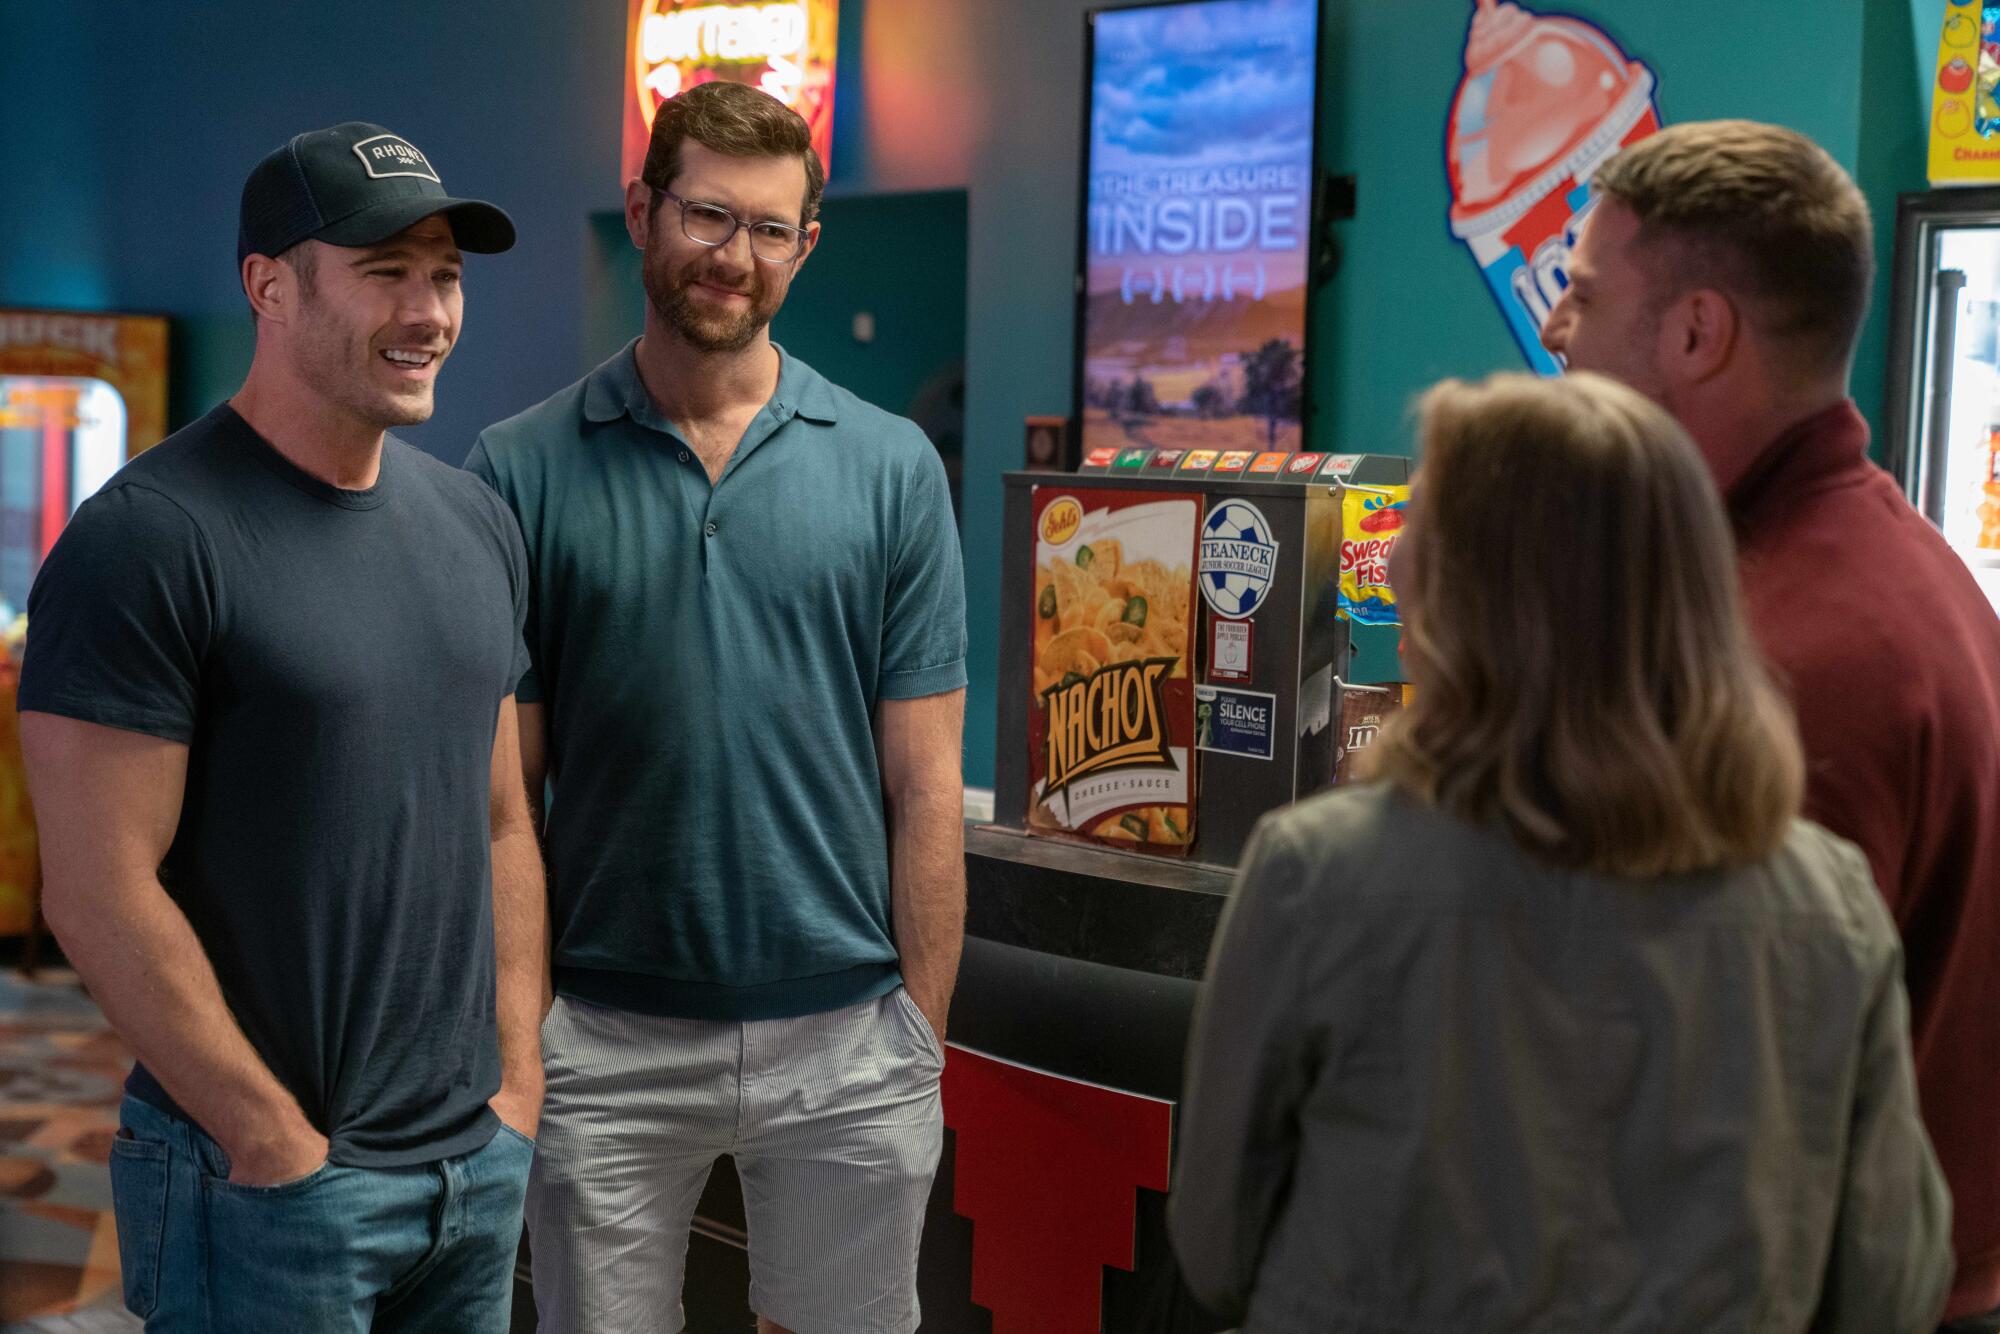 Aaron (Luke Macfarlane) and Bobby (Billy Eichner) on a movie date in "Bros."